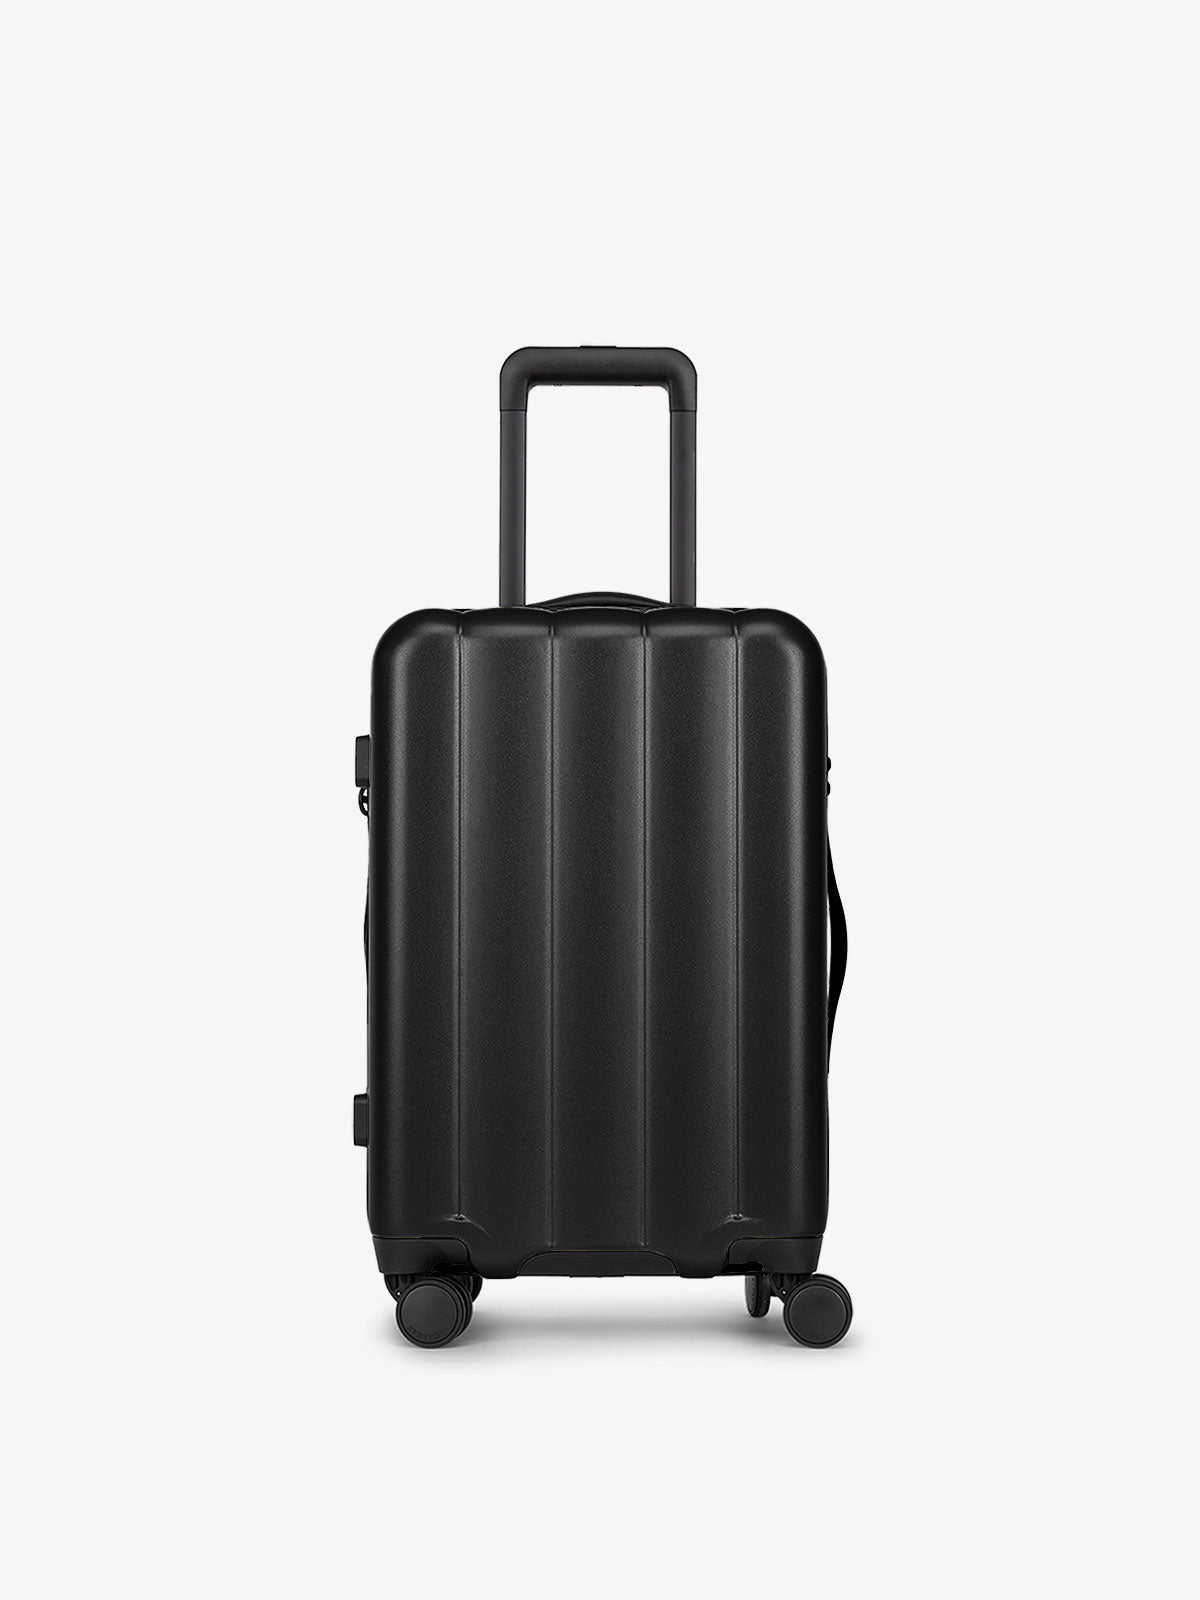 Buy Travel Select Amsterdam Business Rolling Garment Bag, Gray, One Size at  .in